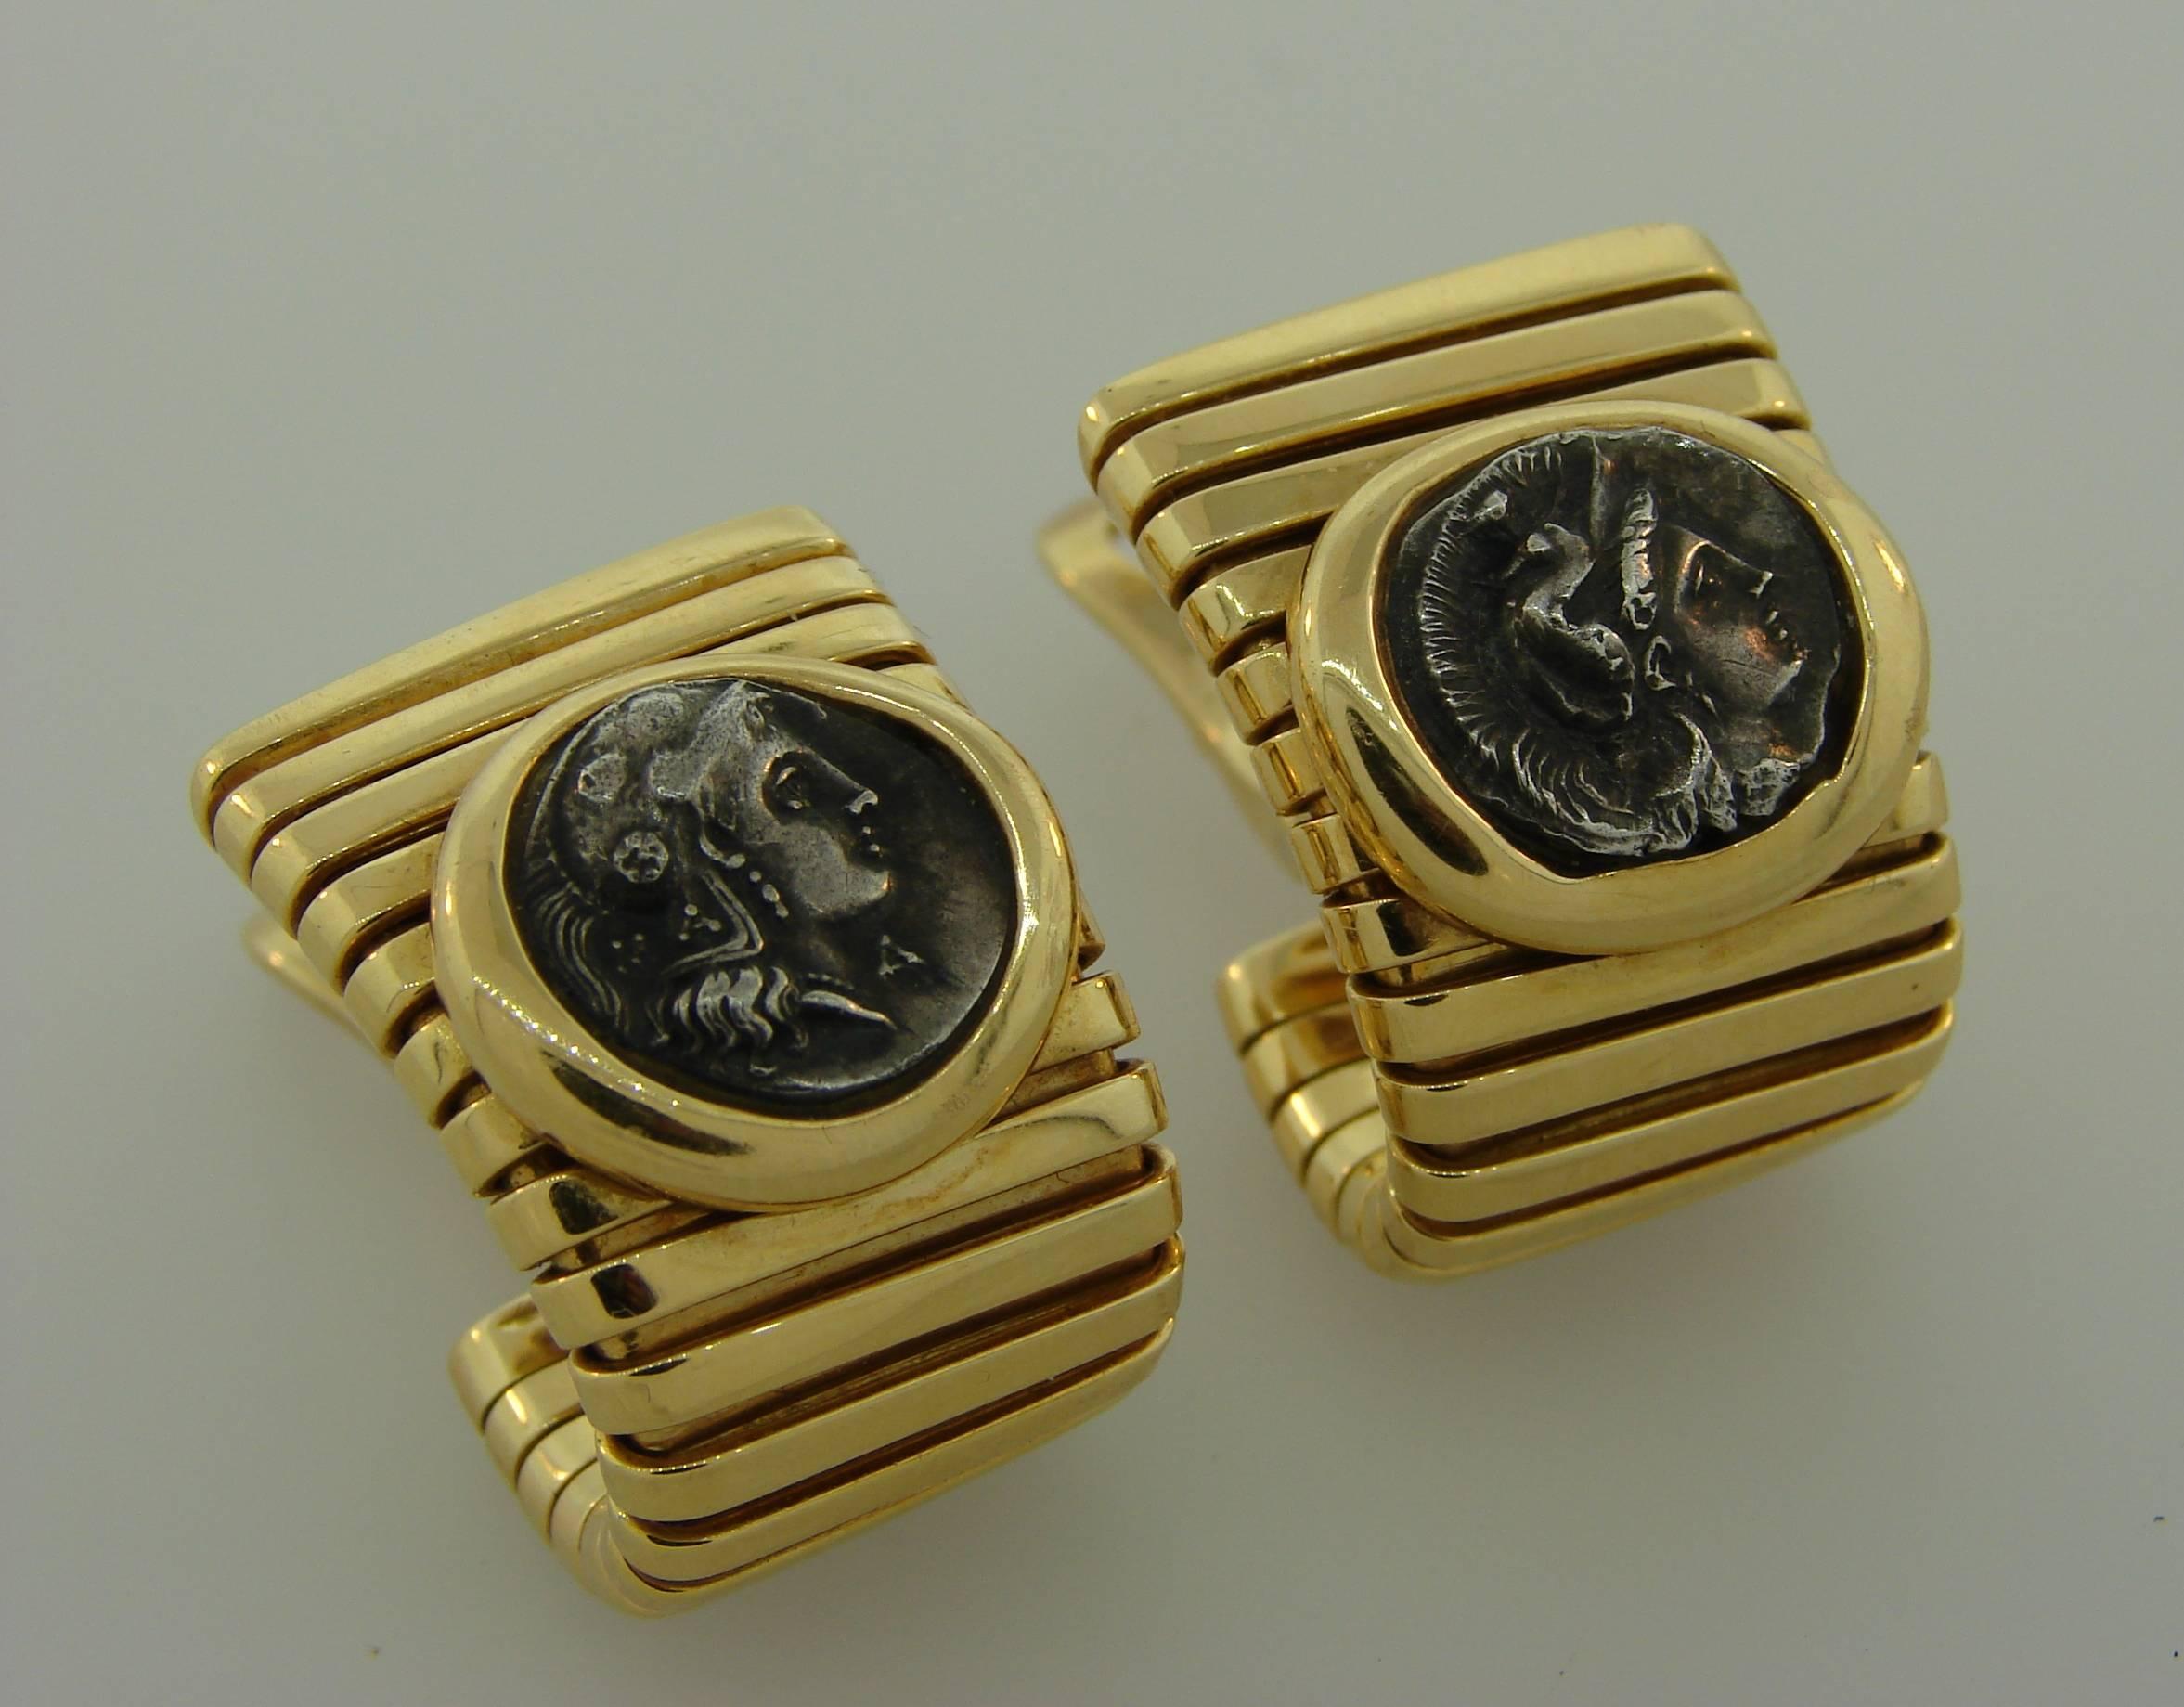 Signature Bulgari earrings featuring ancient Roman coins dated 4th century B.C.  Belong to popular and always in vogue Monete Collection. The coins are set in 18 karat yellow gold.These elegant, classy and wearable earrings are a great addition to